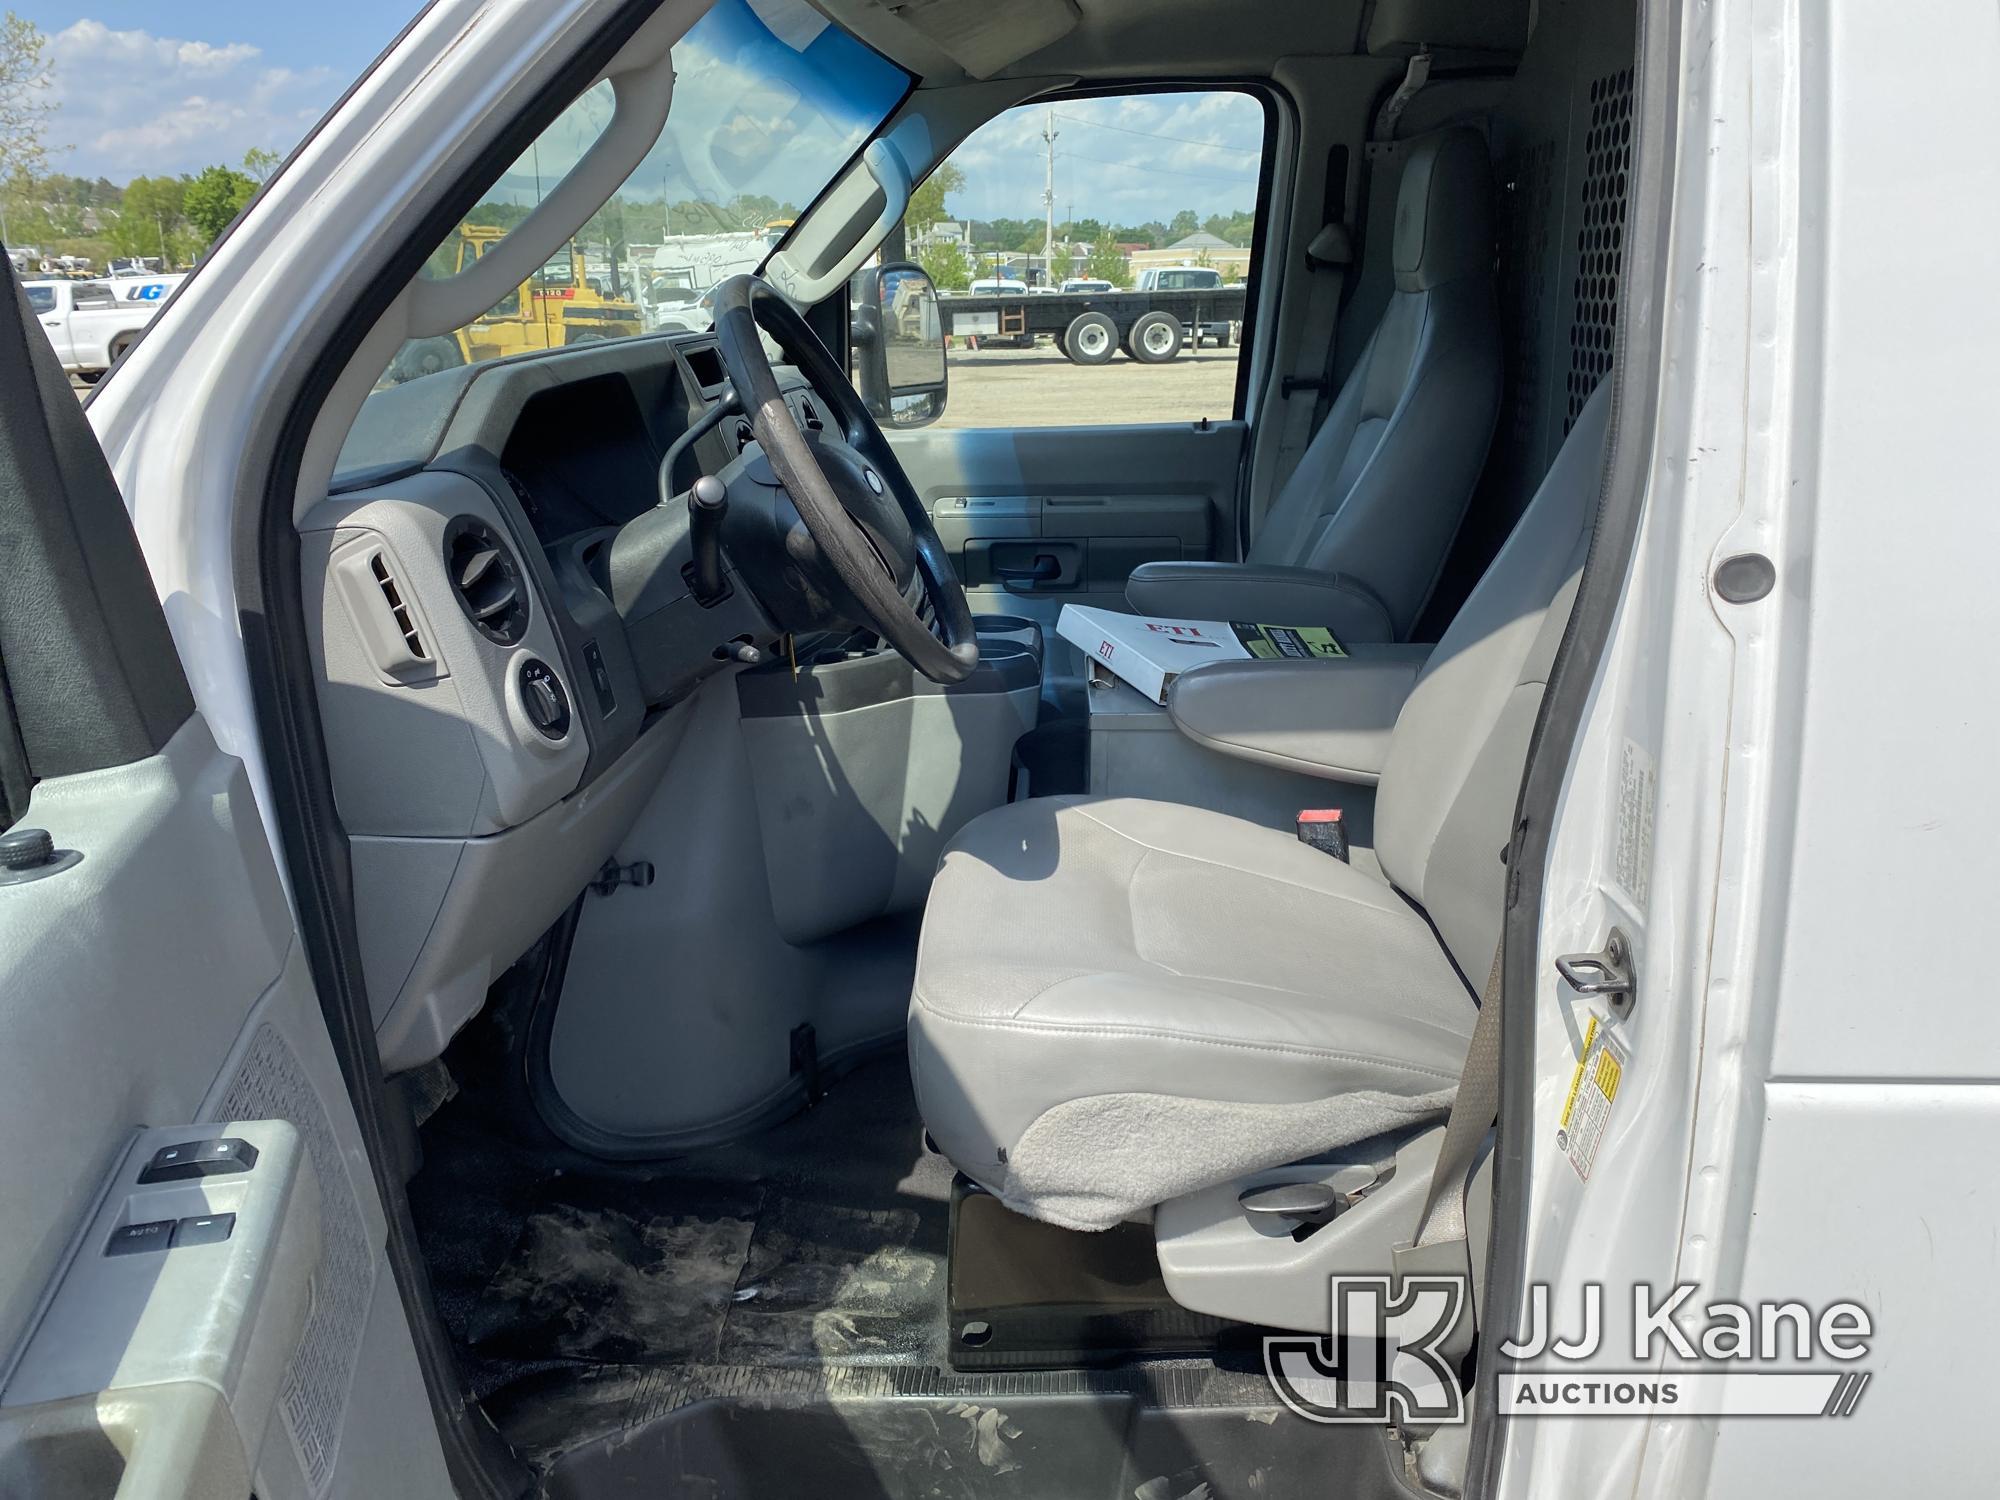 (Plymouth Meeting, PA) ETI ETT29-SNV, Telescopic Non-Insulated Bucket Van mounted on 2013 Ford E350